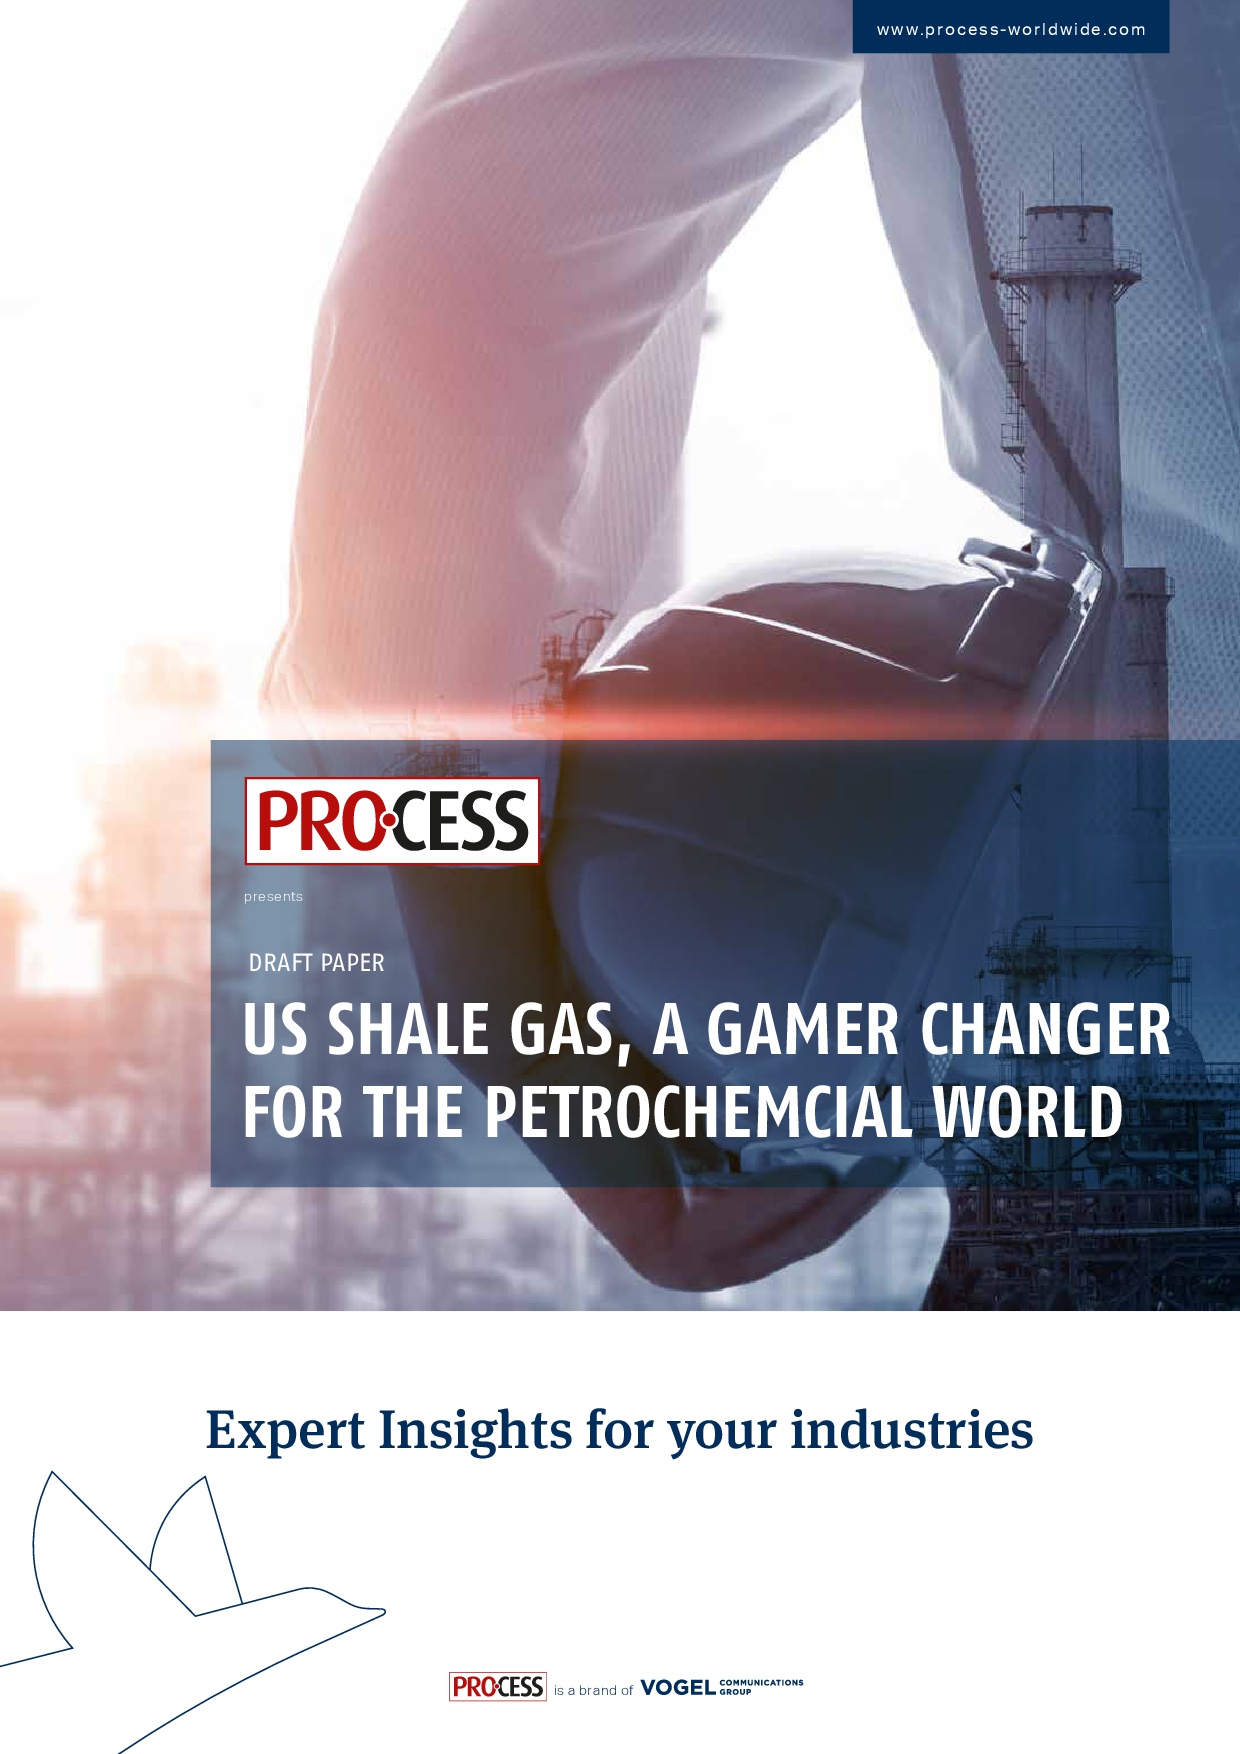 PROCESS Insights: US Shale gas, a gamer changer for the Petrochemical world